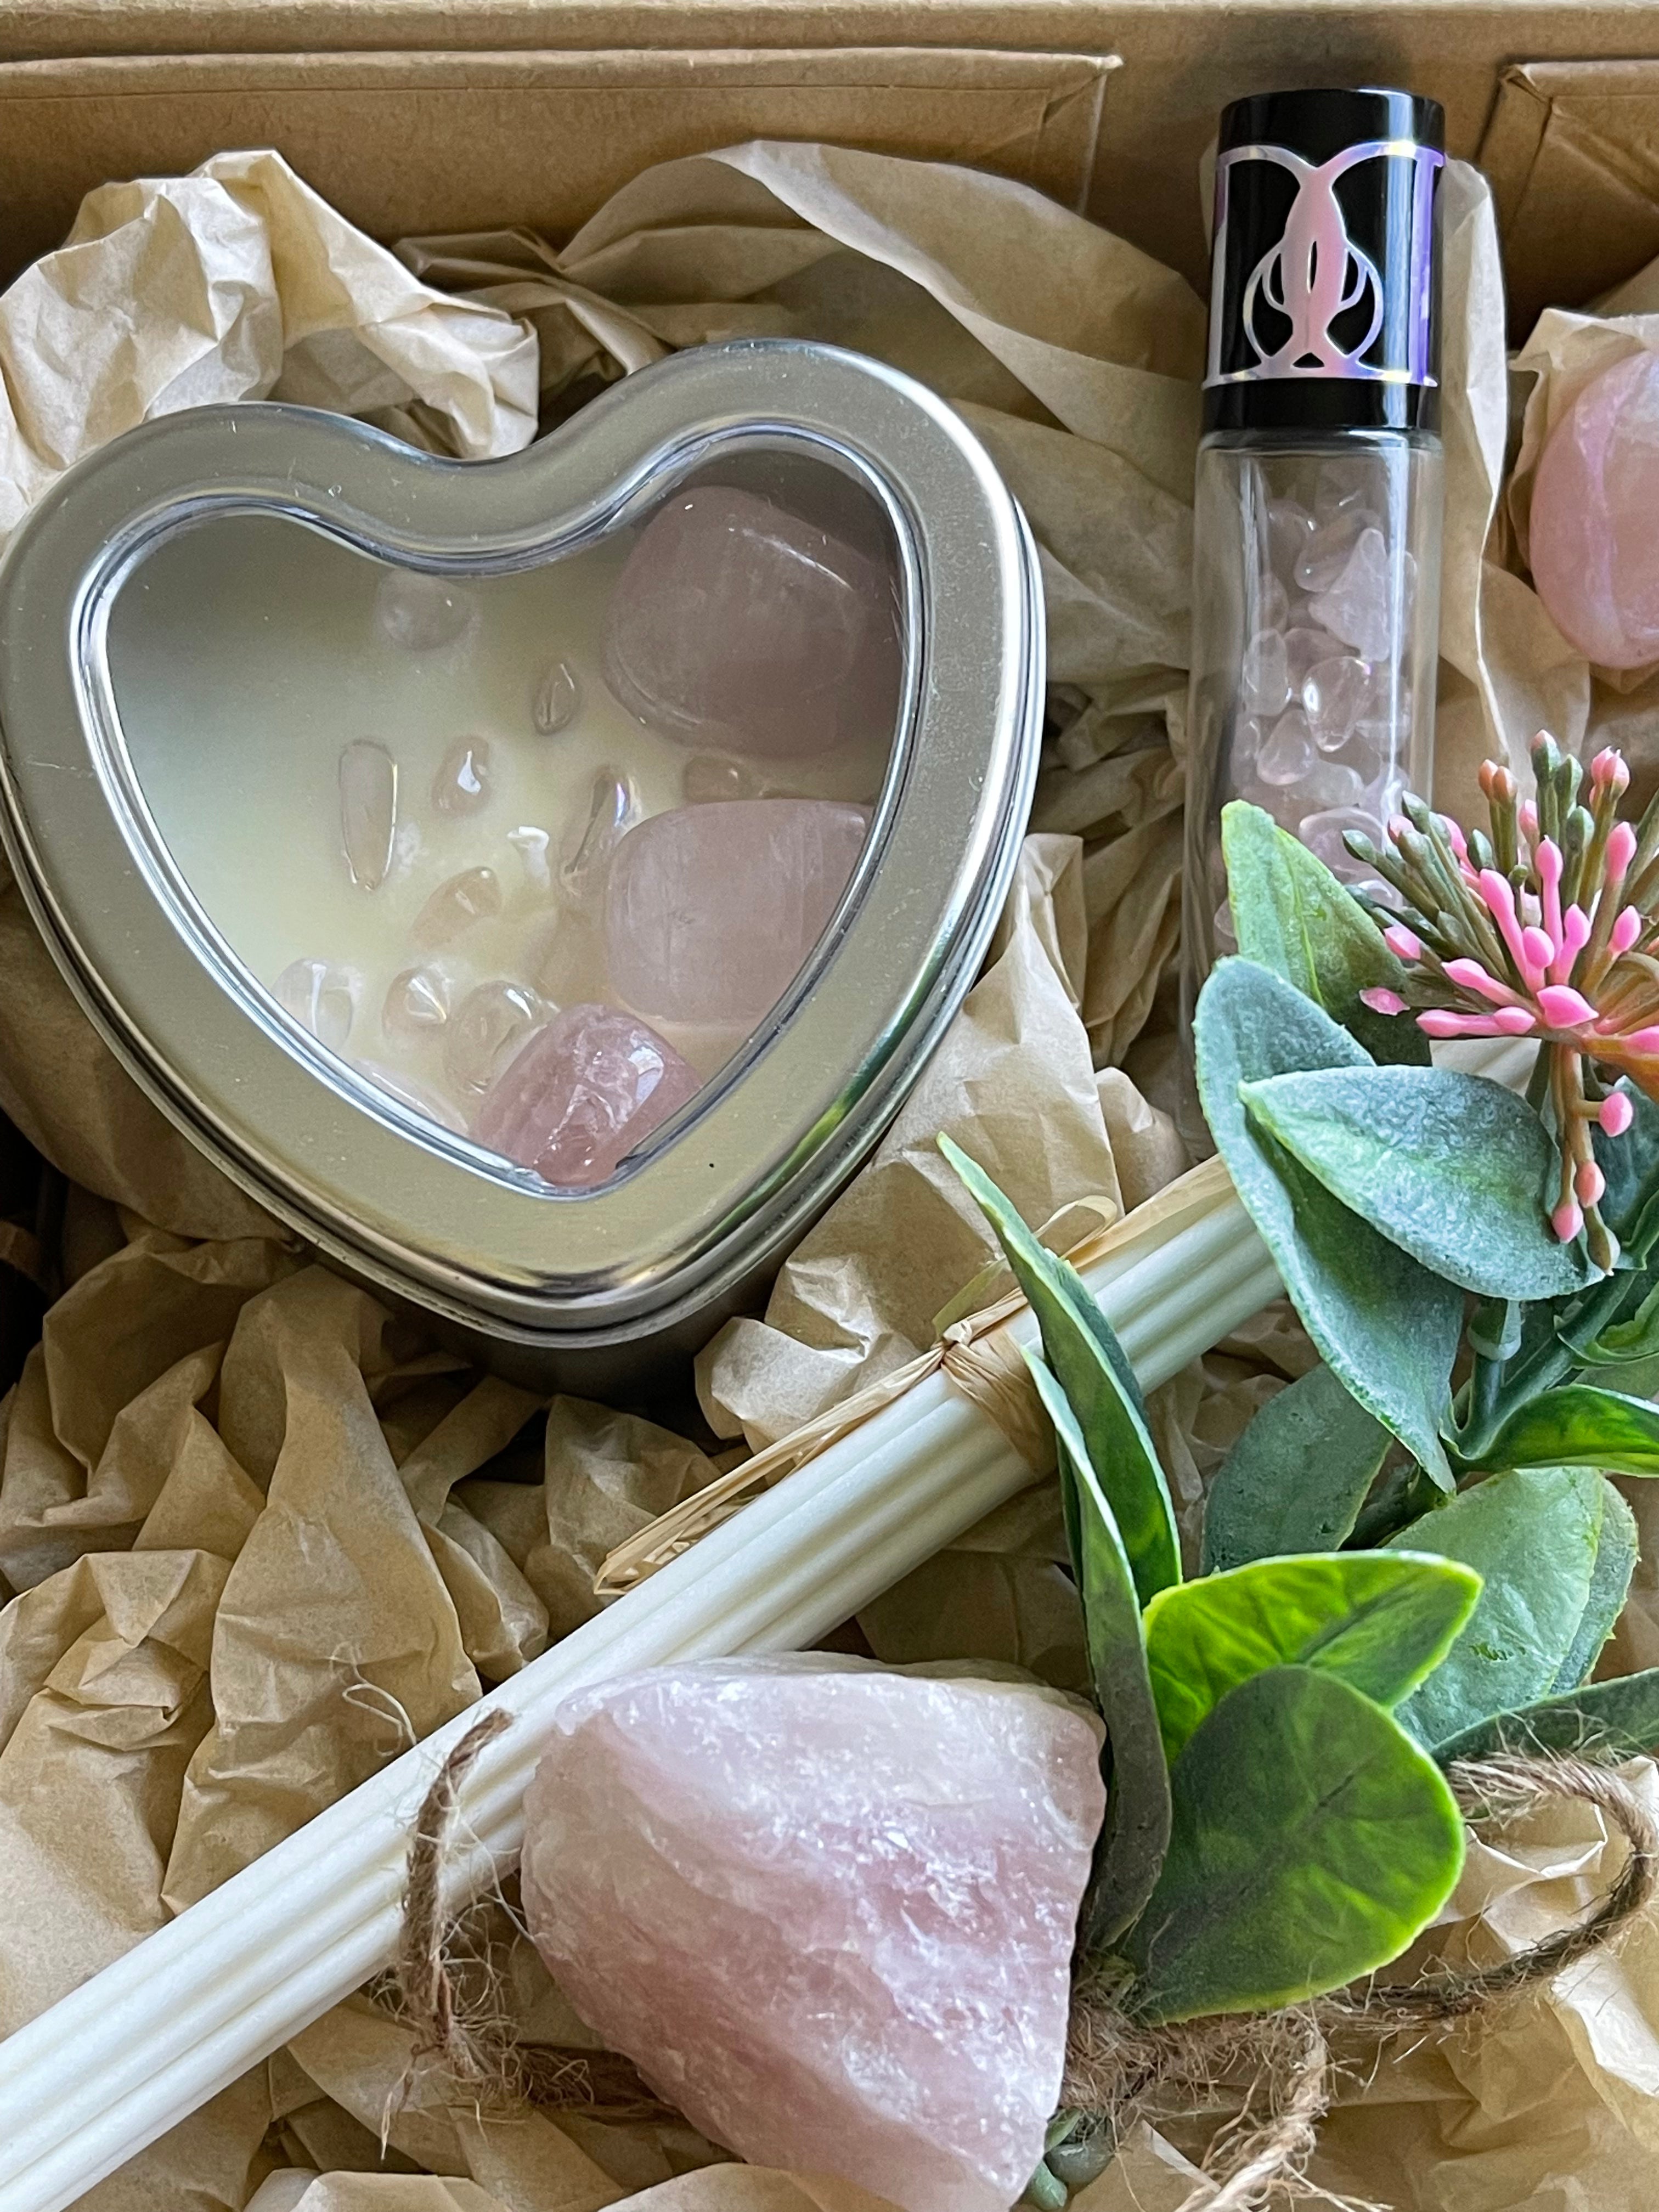 “Love” Scented Crystal Gift Box